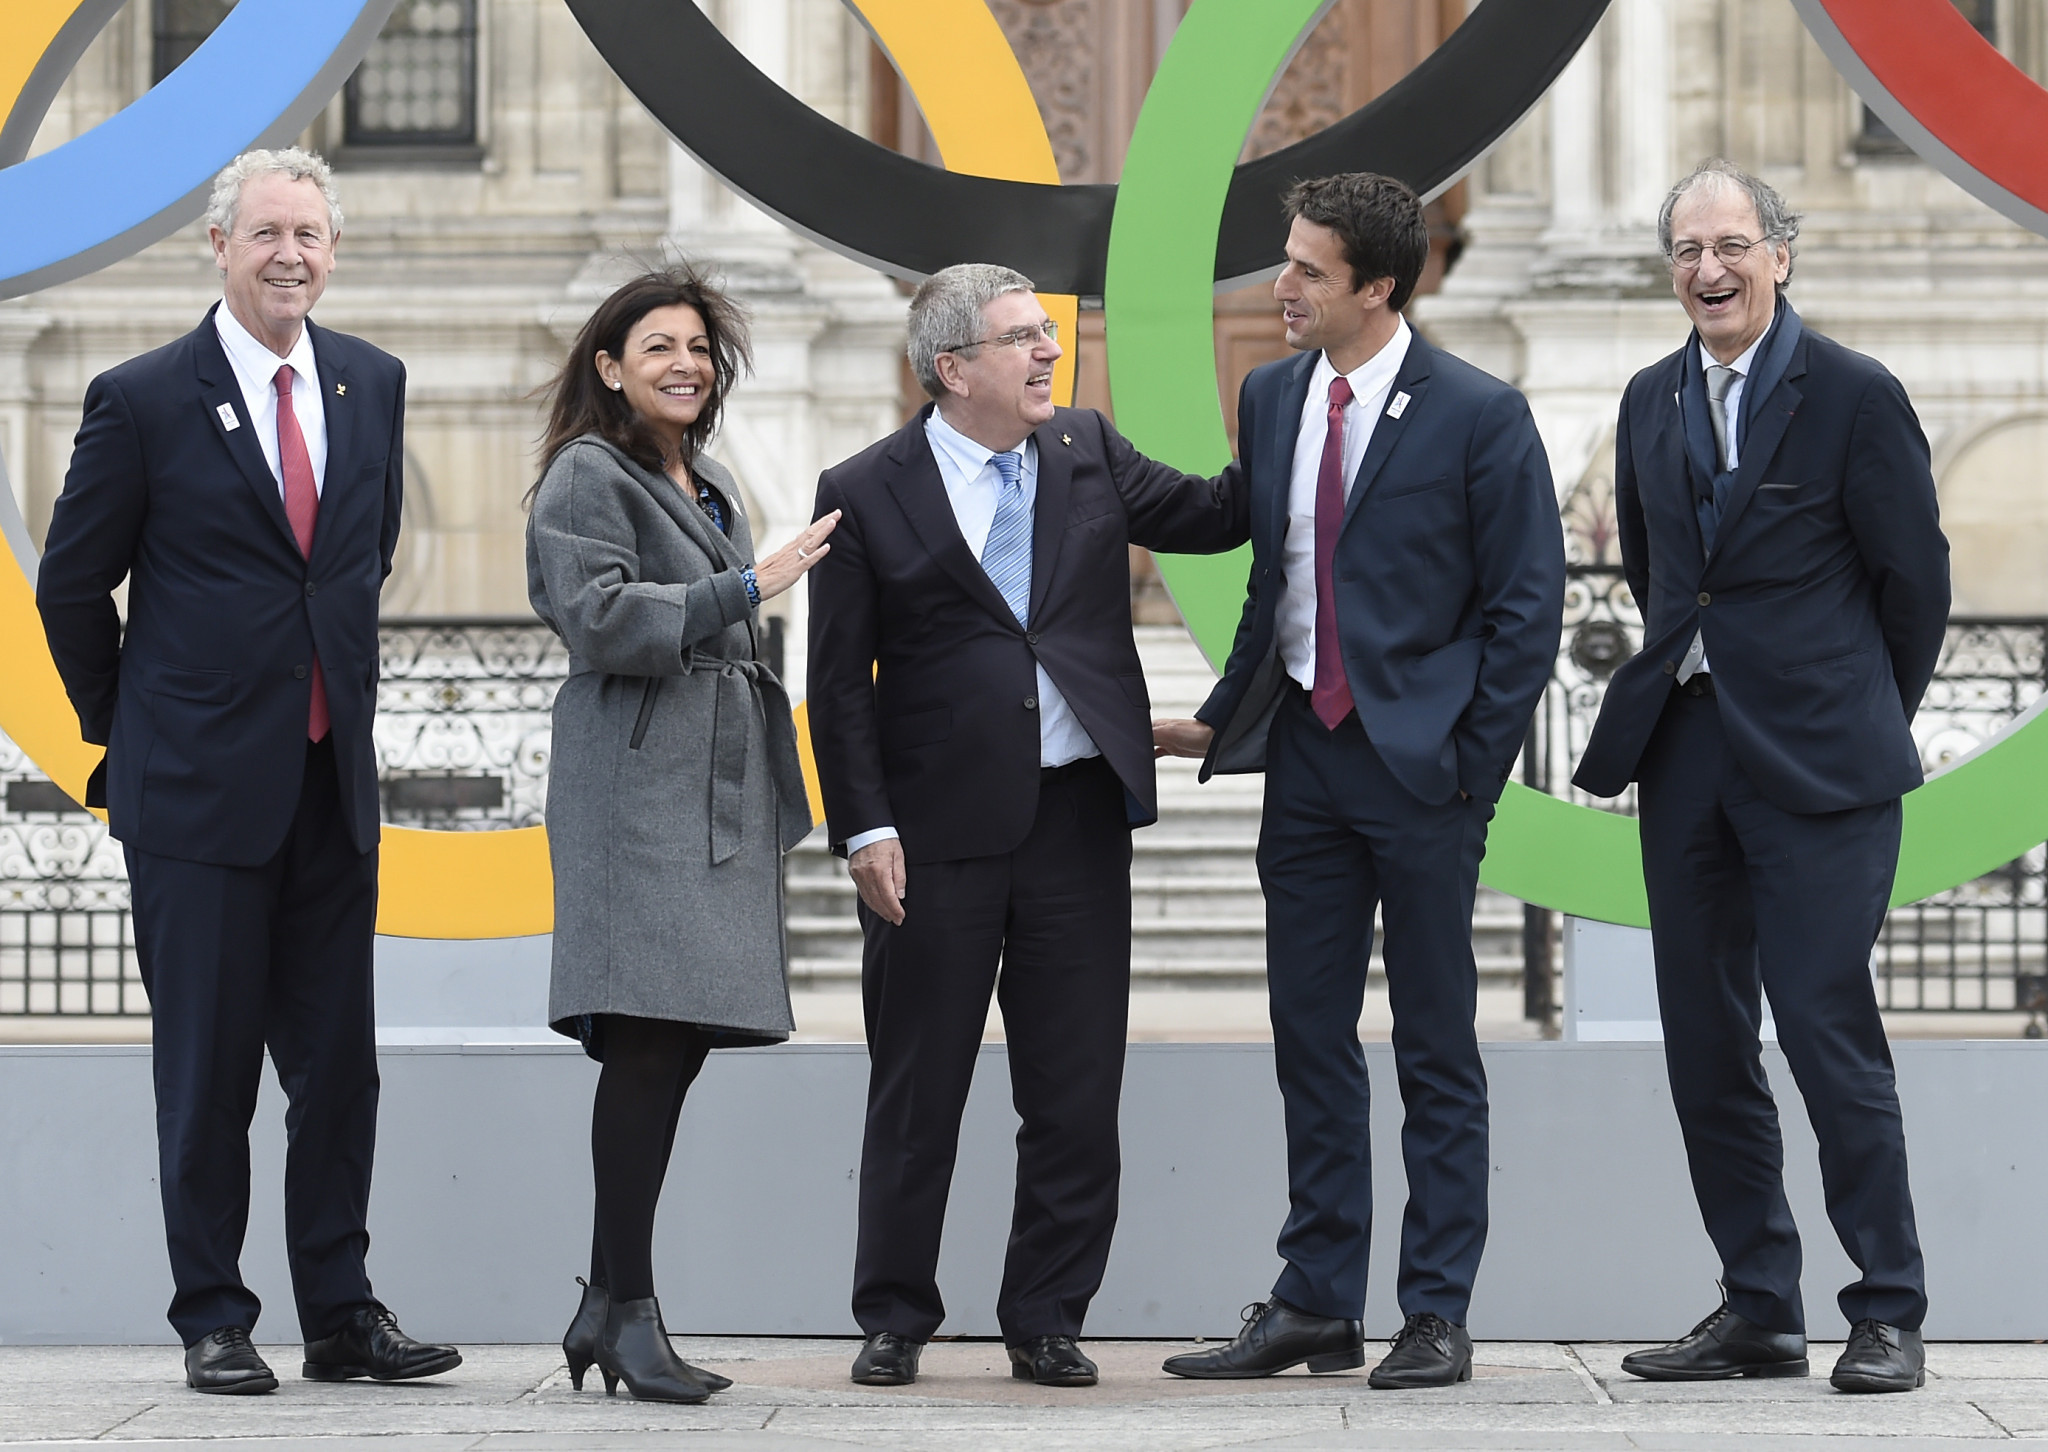 Tony Estanguet, second right, pictured with officials include IOC President Thomas Bach, centre, and Paris Mayor Anne Hidalgo, second left ©Getty Images